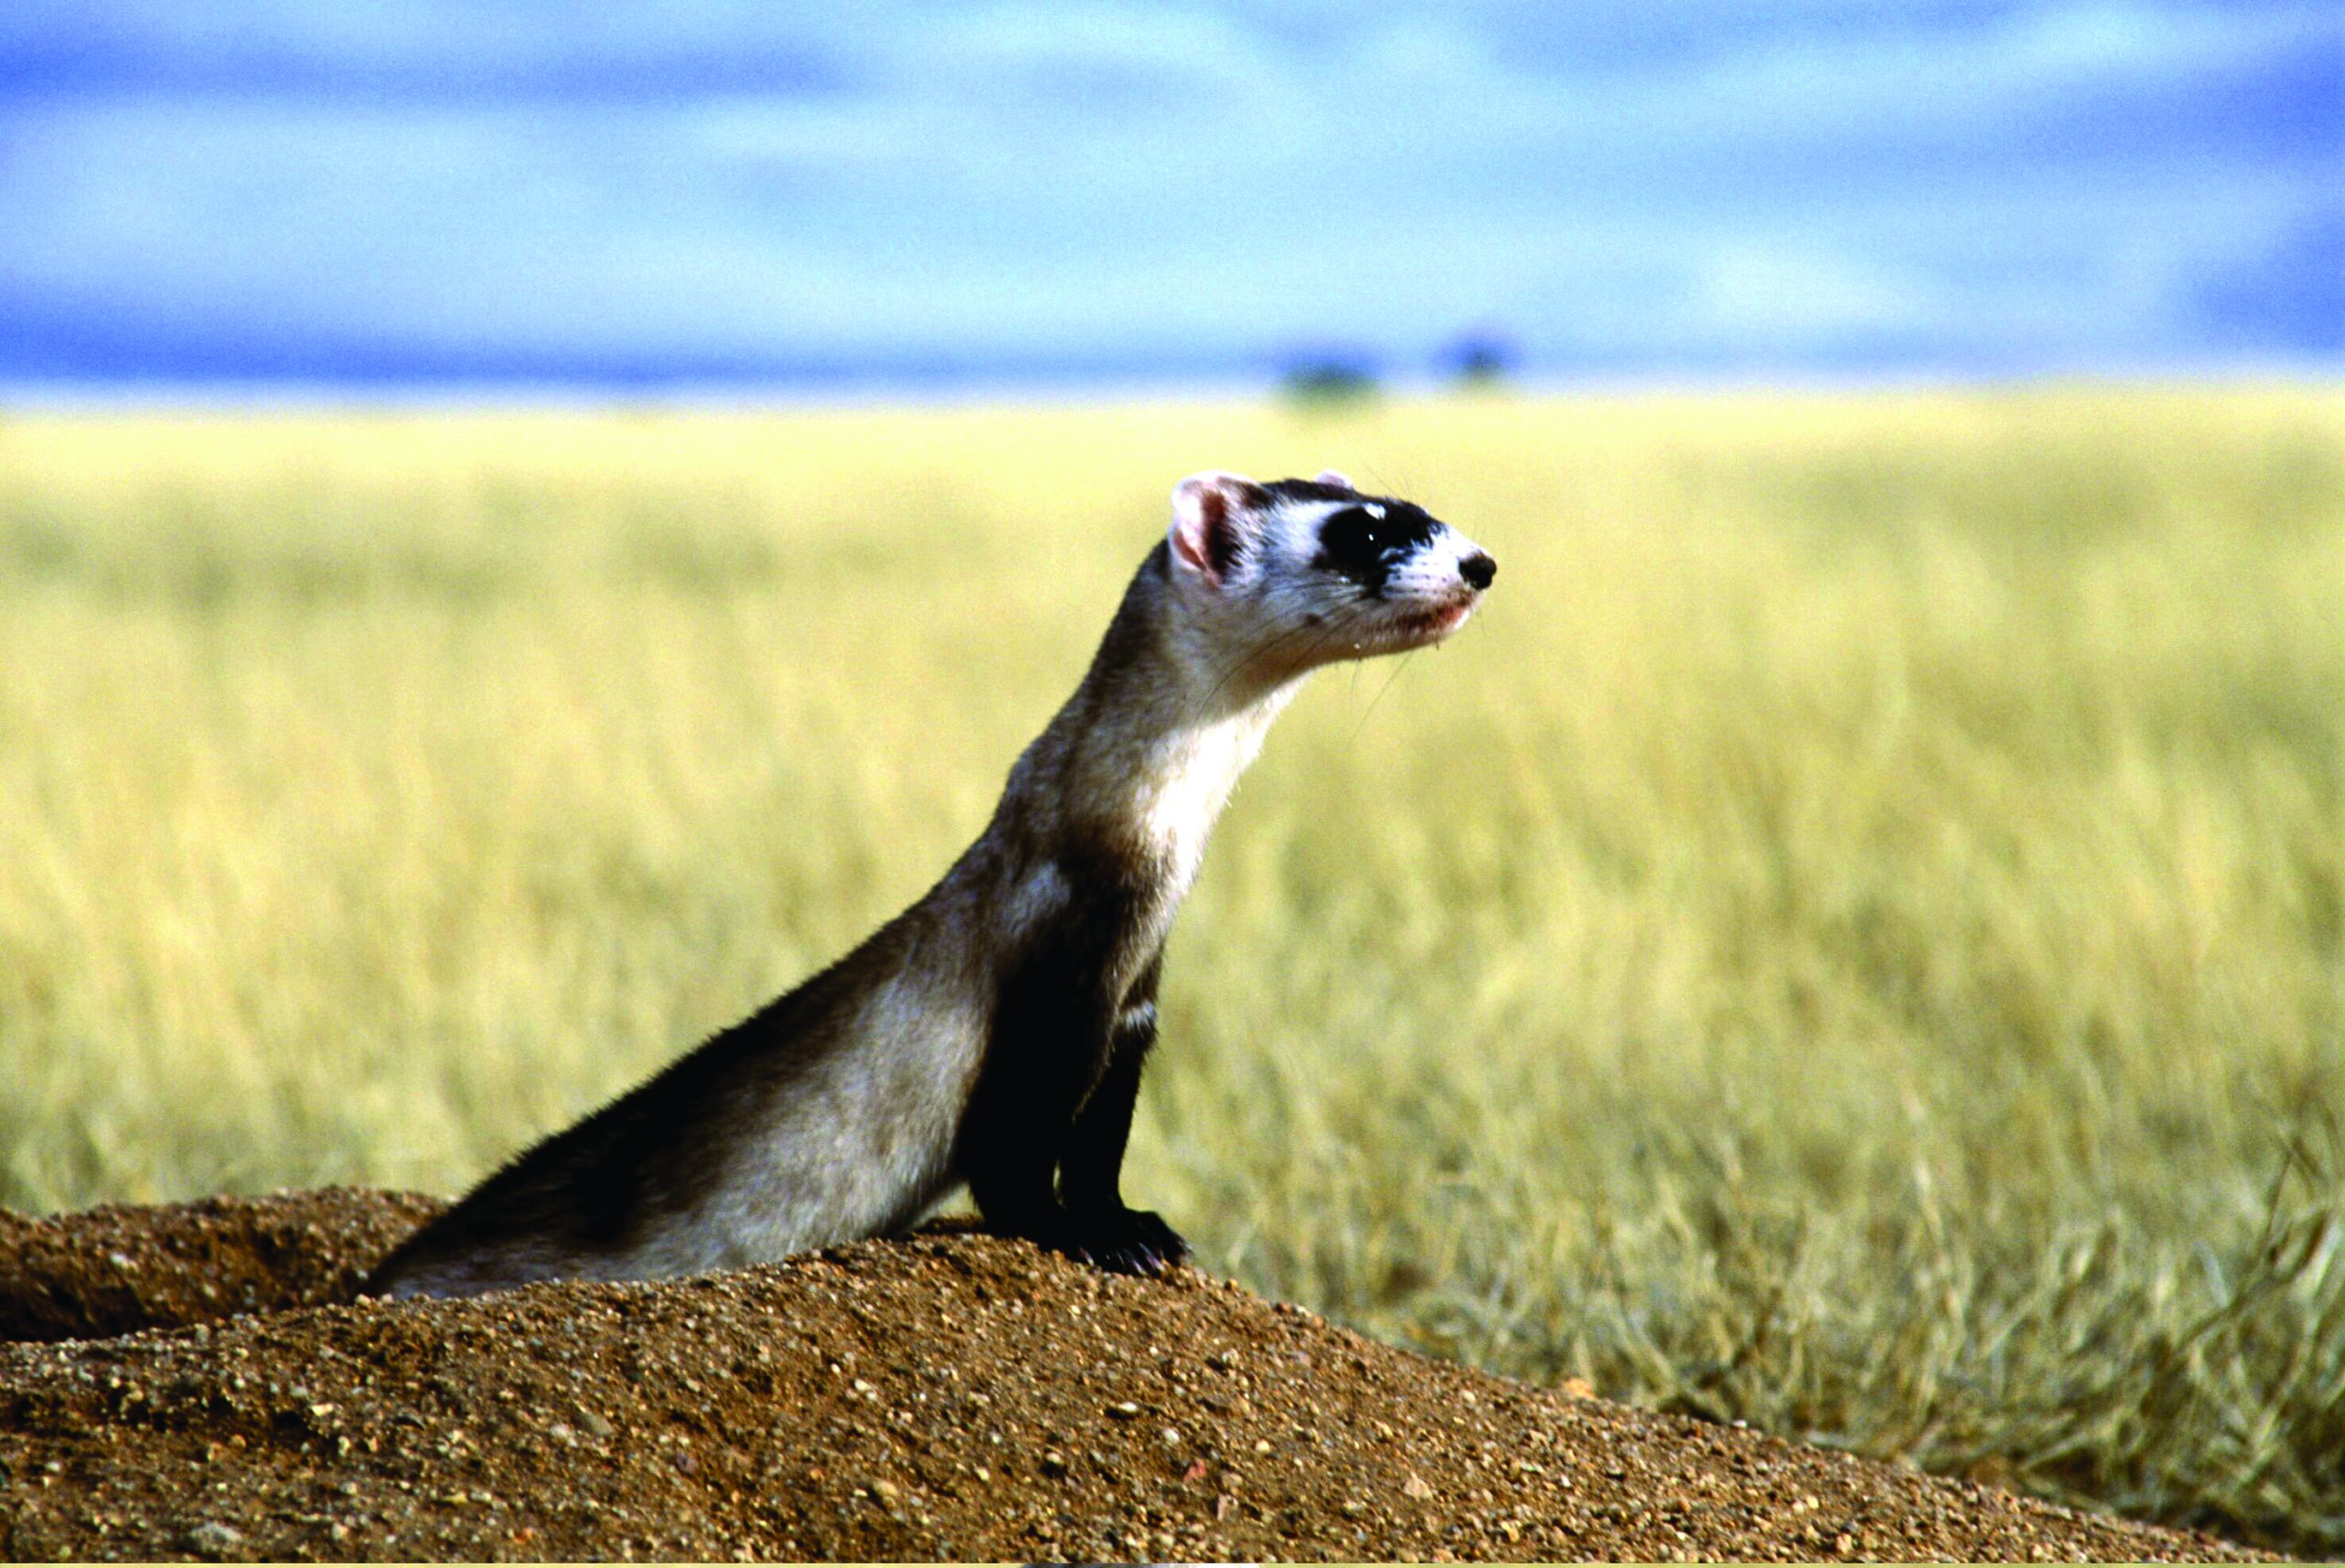 black-footed-ferret-in-its-natural-habitat